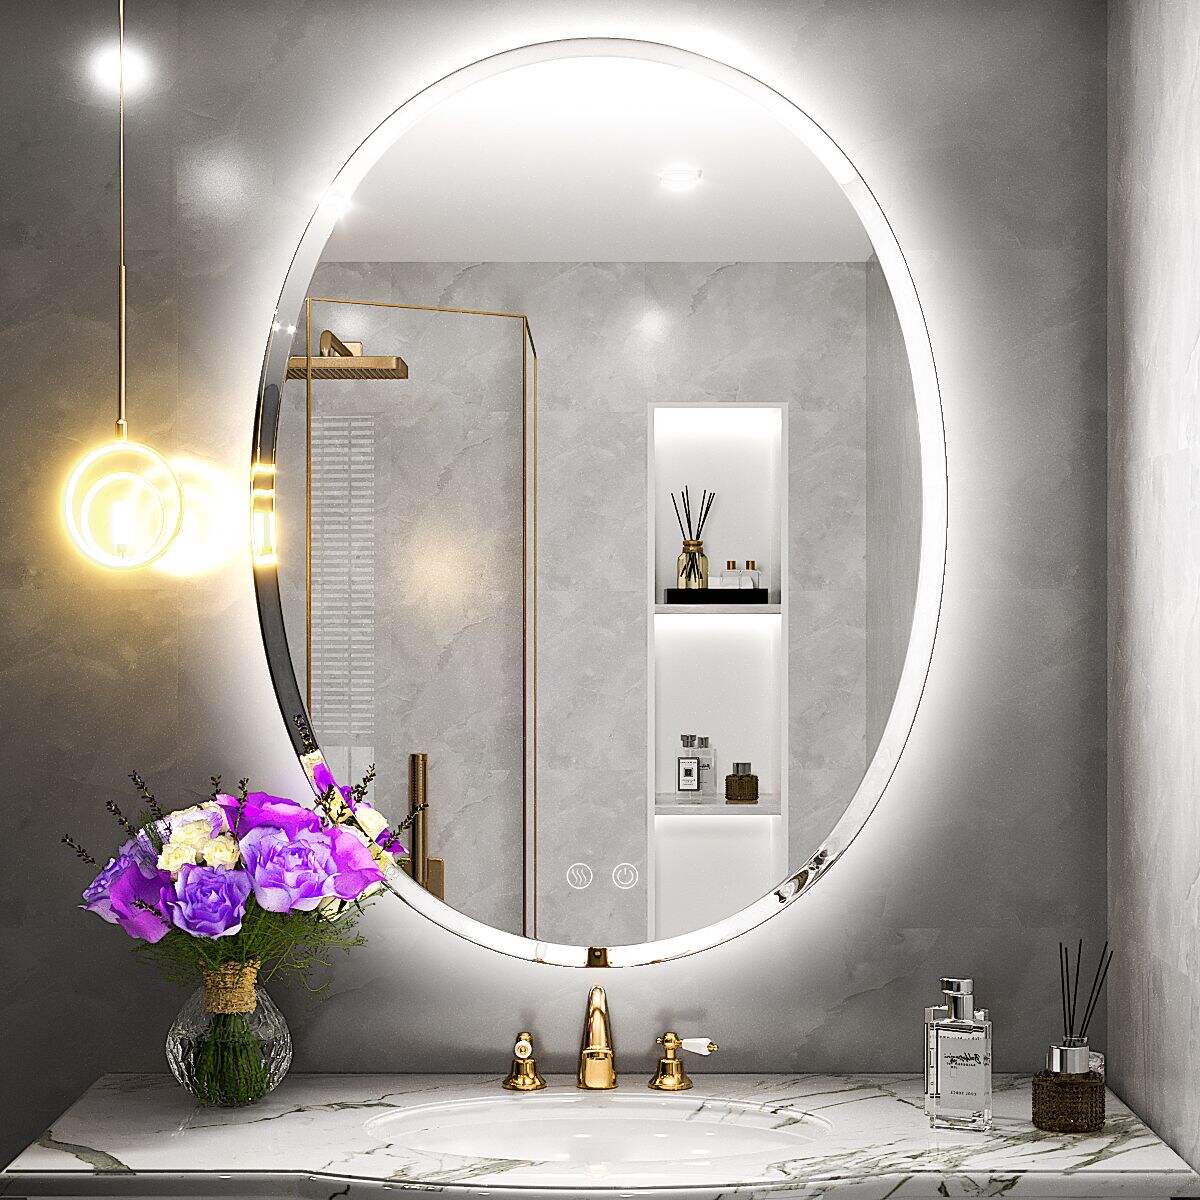 JJGullit bathroom mirror supplier  24x32 Inch Oval LED Bathroom Mirror, Backlit Beveled Mirror, Wall Mounted Vanity Mirror with Lights, Dimmable Touch Switch, Anti-Fog Modern Lighted Mirrors(HorizontalVertical)